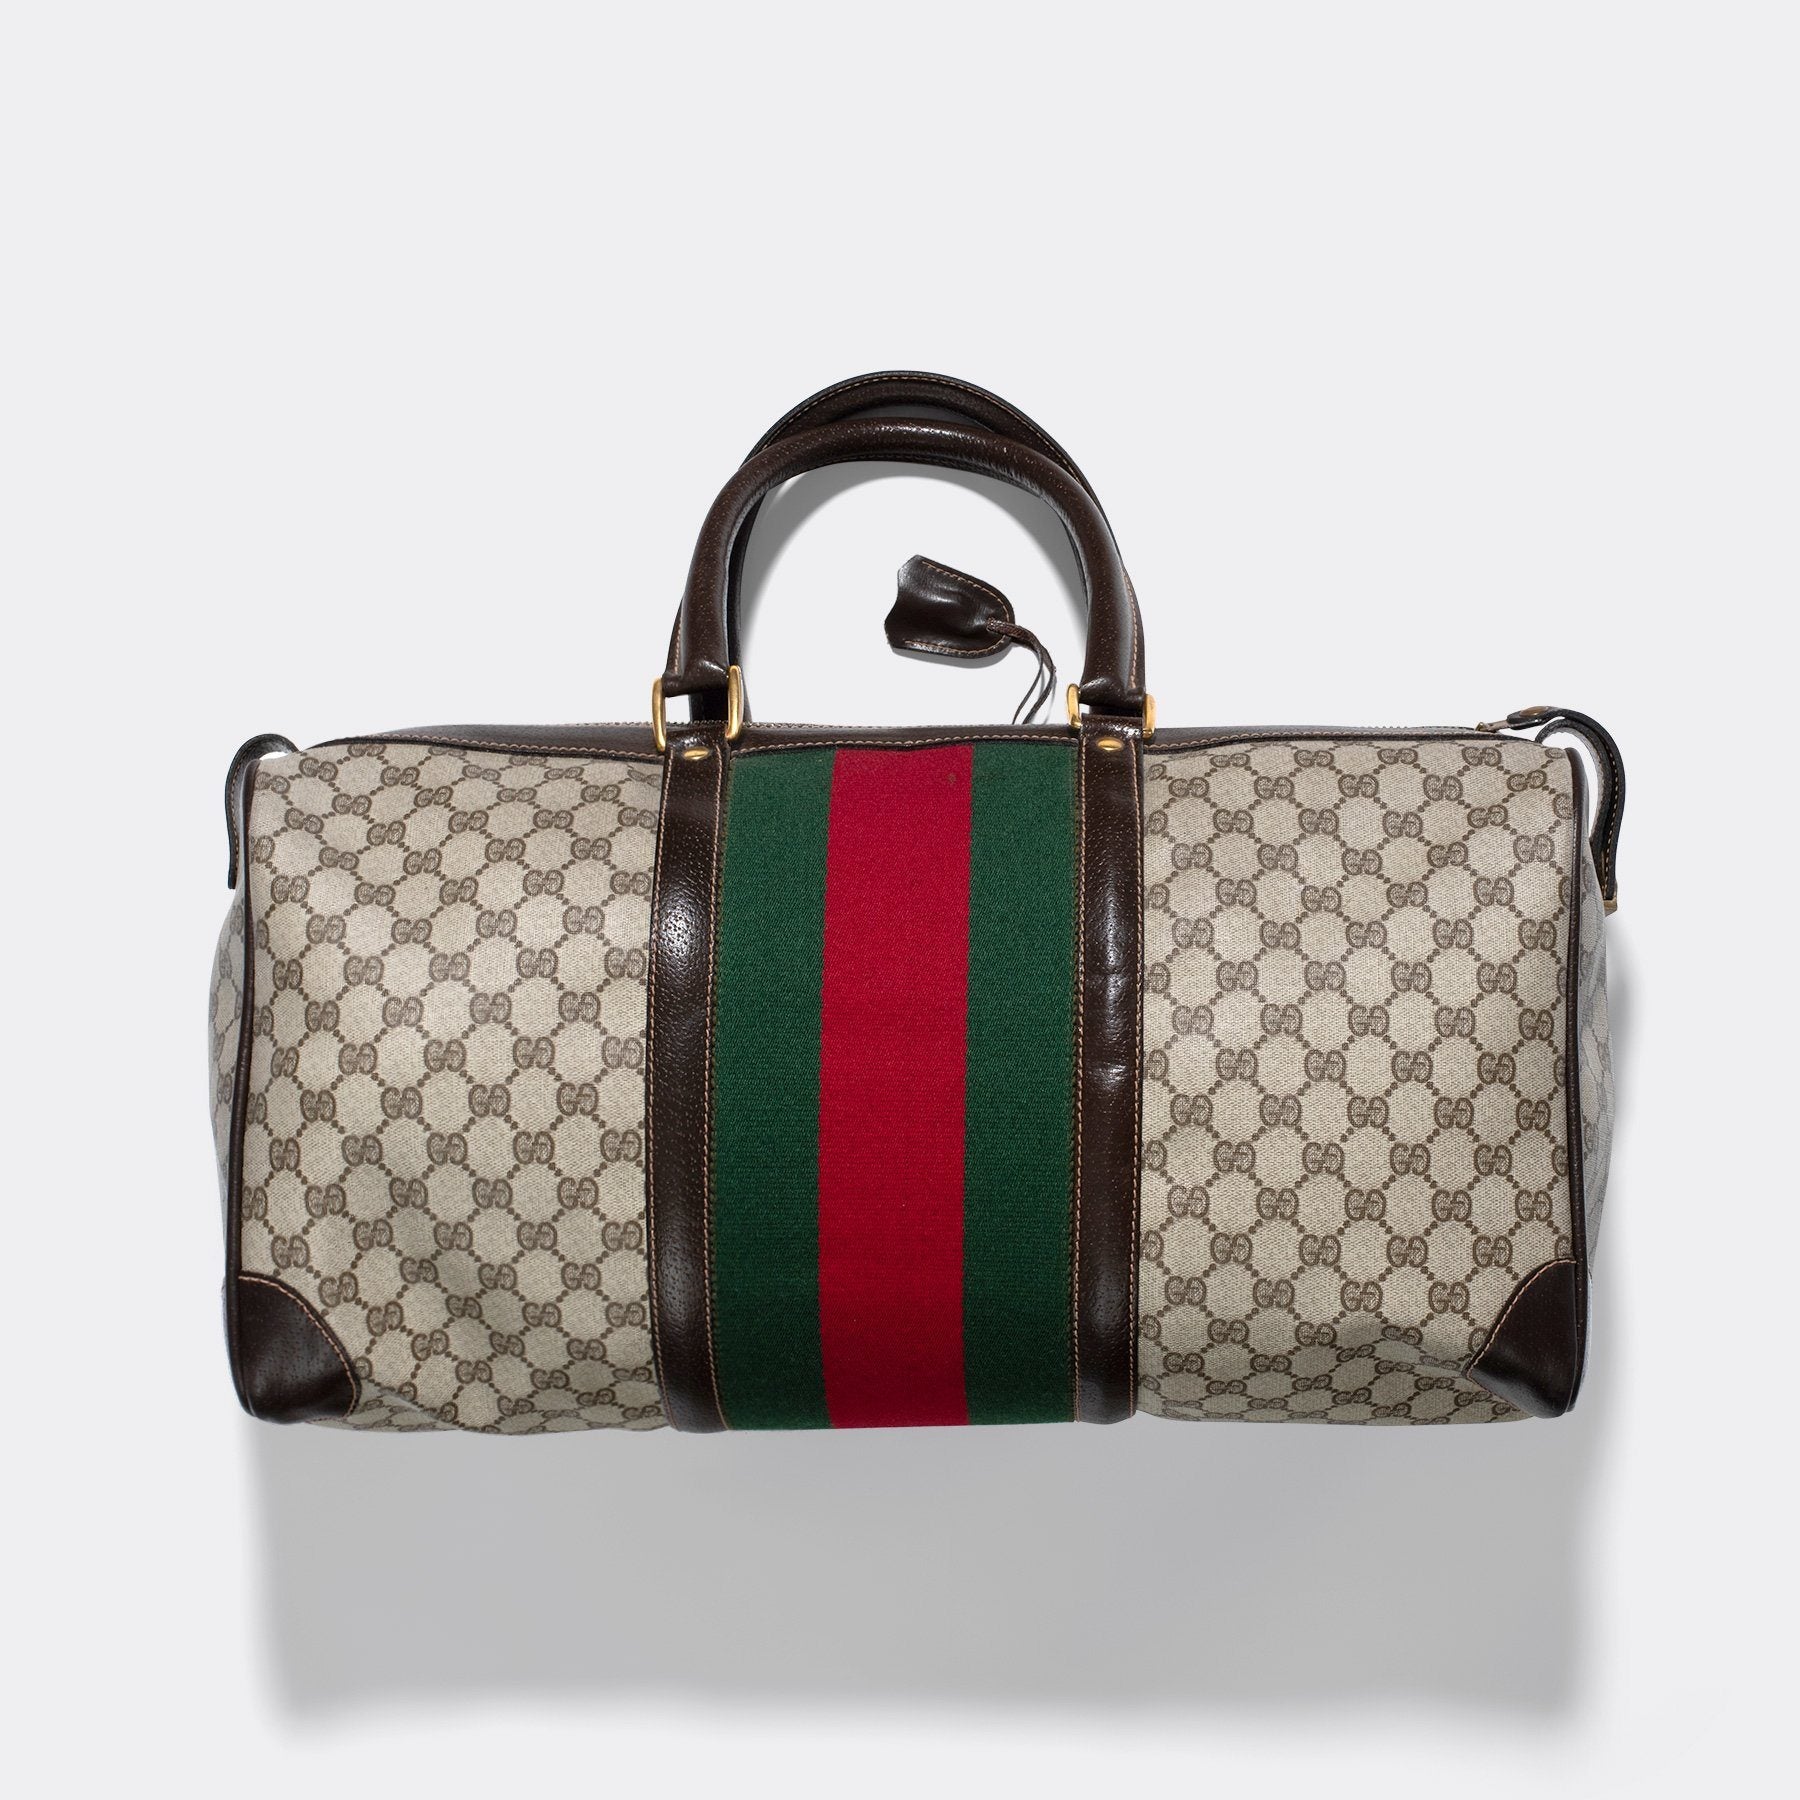 1:1 top quality gucci keepall bag from Bares. We sell clothes